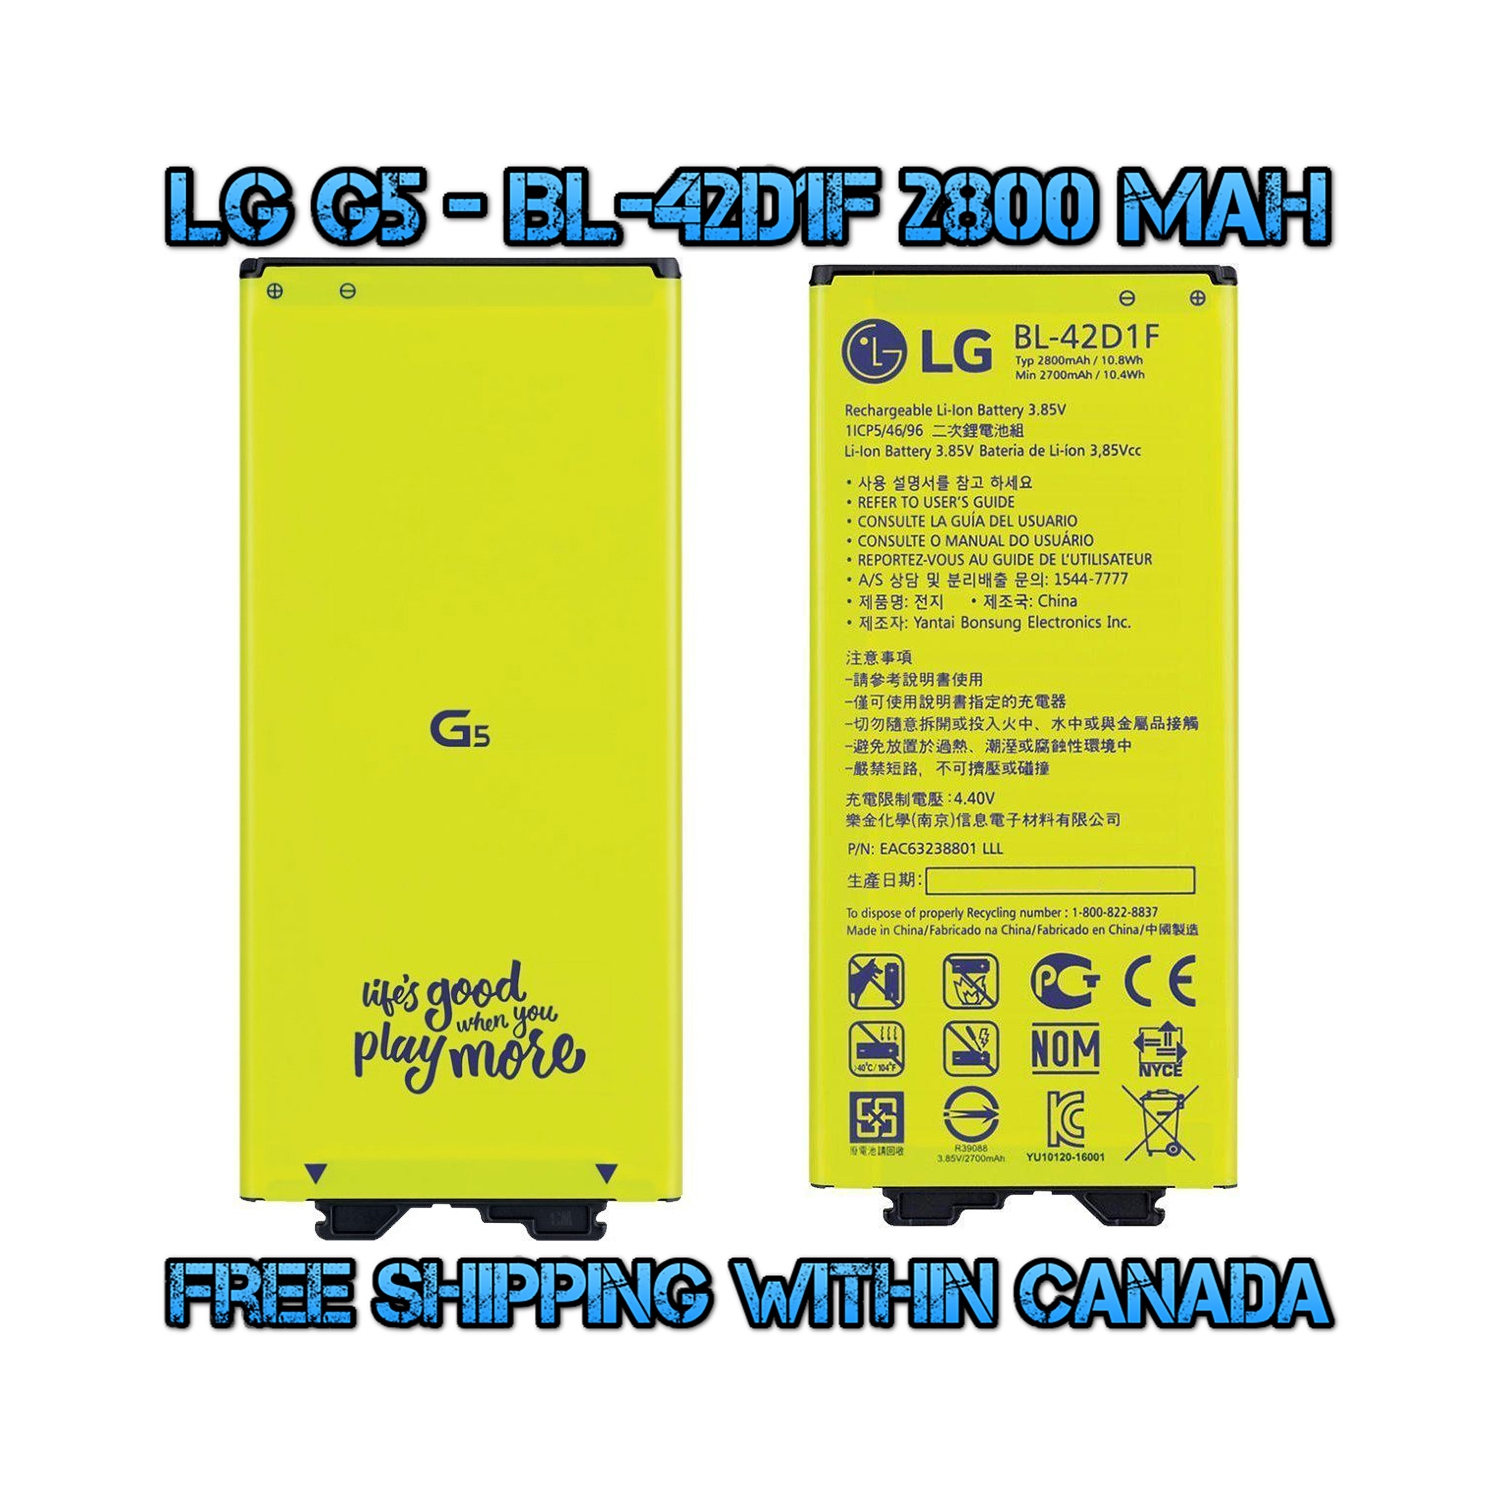 New OEM Replacement Battery Model BL-42D1F 2800 mAh for LG G5 H820 H831 H840 H850 H860 H868 - (FREE SHIPPING)